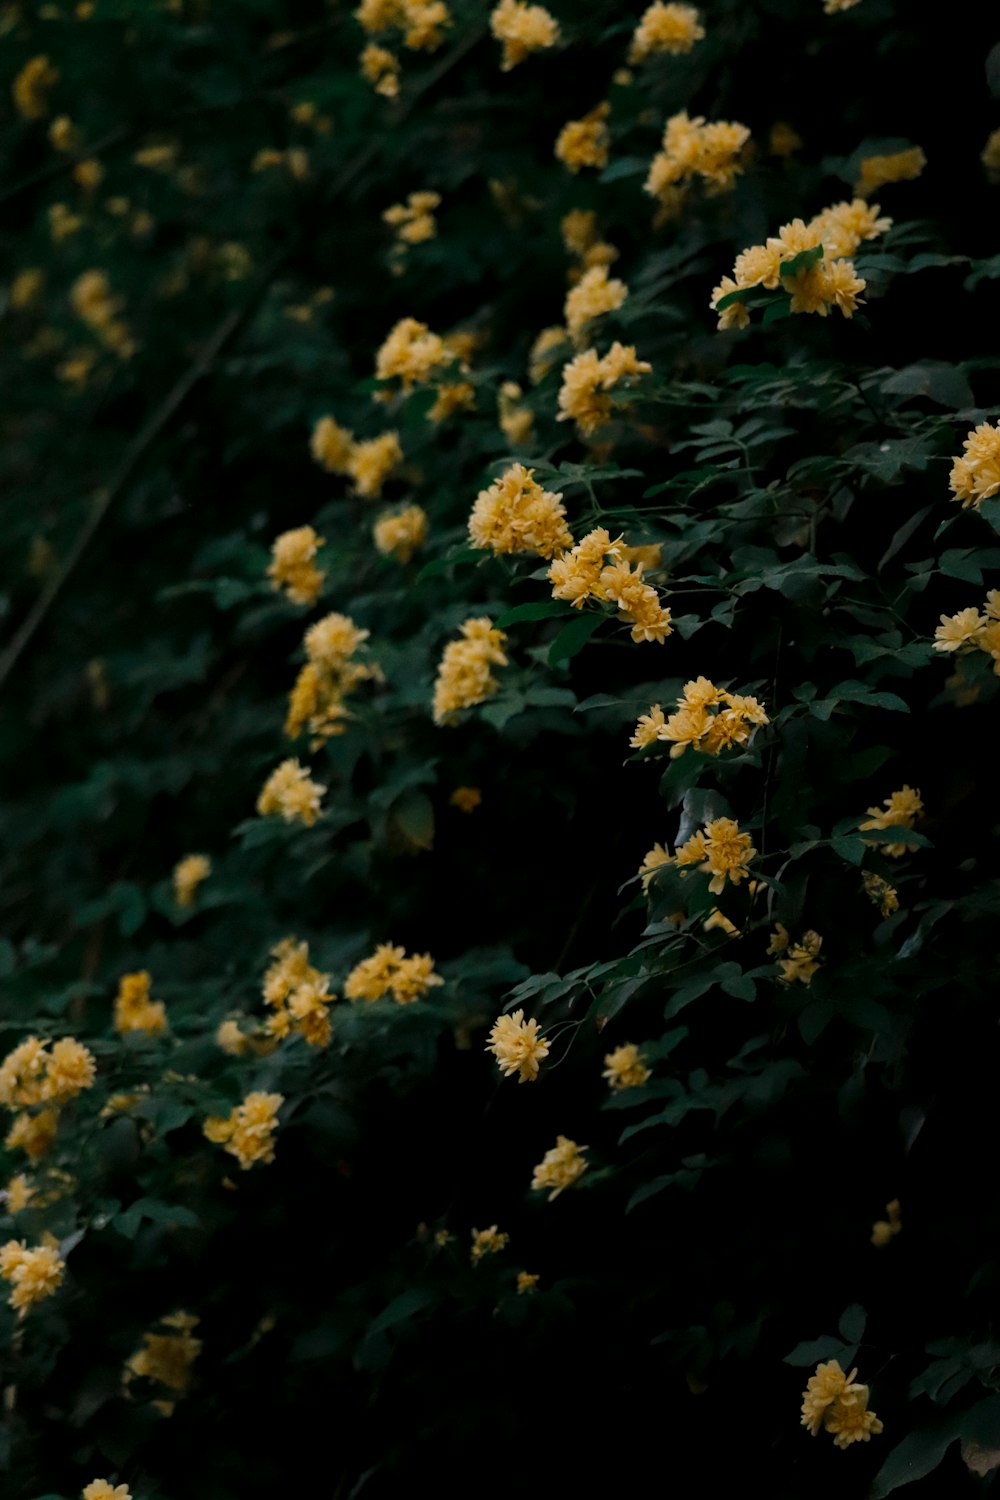 a bunch of yellow flowers growing on a tree